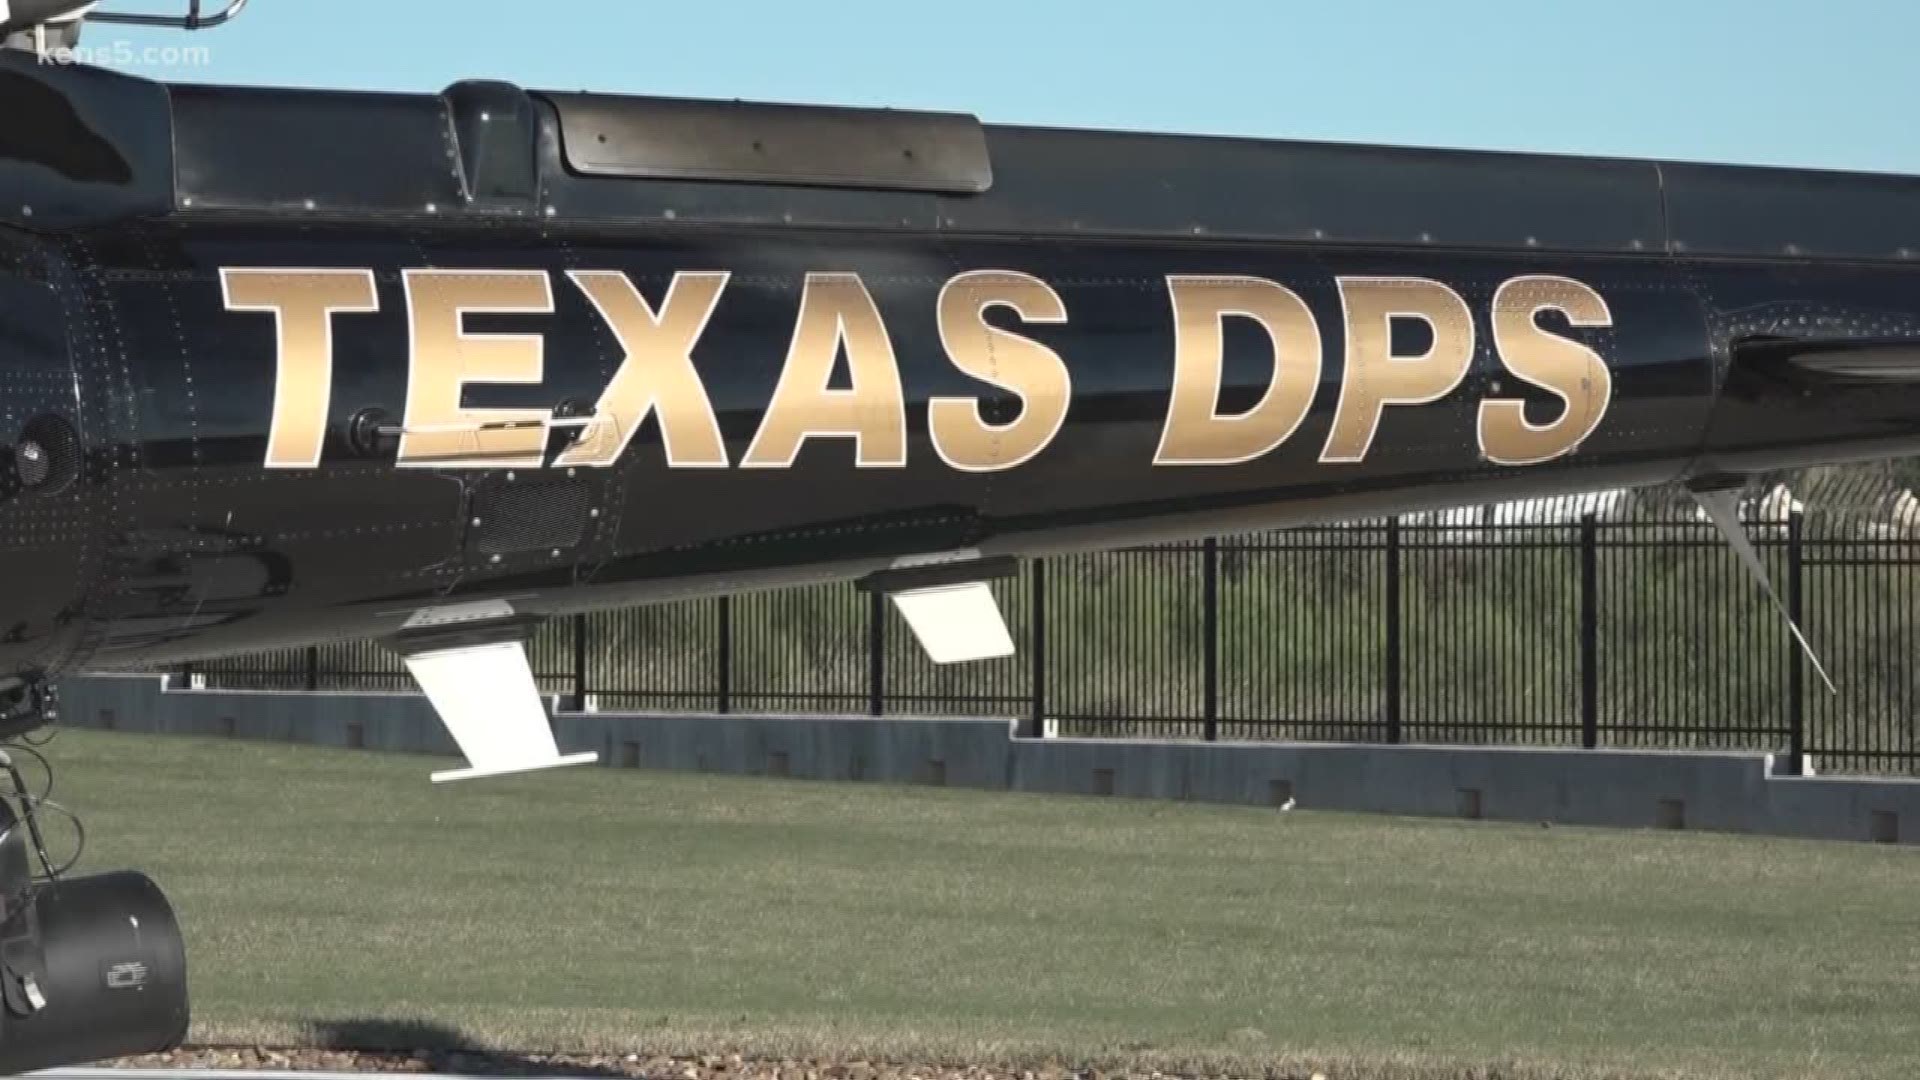 A DPS trooper shares his gratitude for the helicopter pilots who helped save his life. Eyewitness News reporter Henry Ramos joins us with their special reunion.